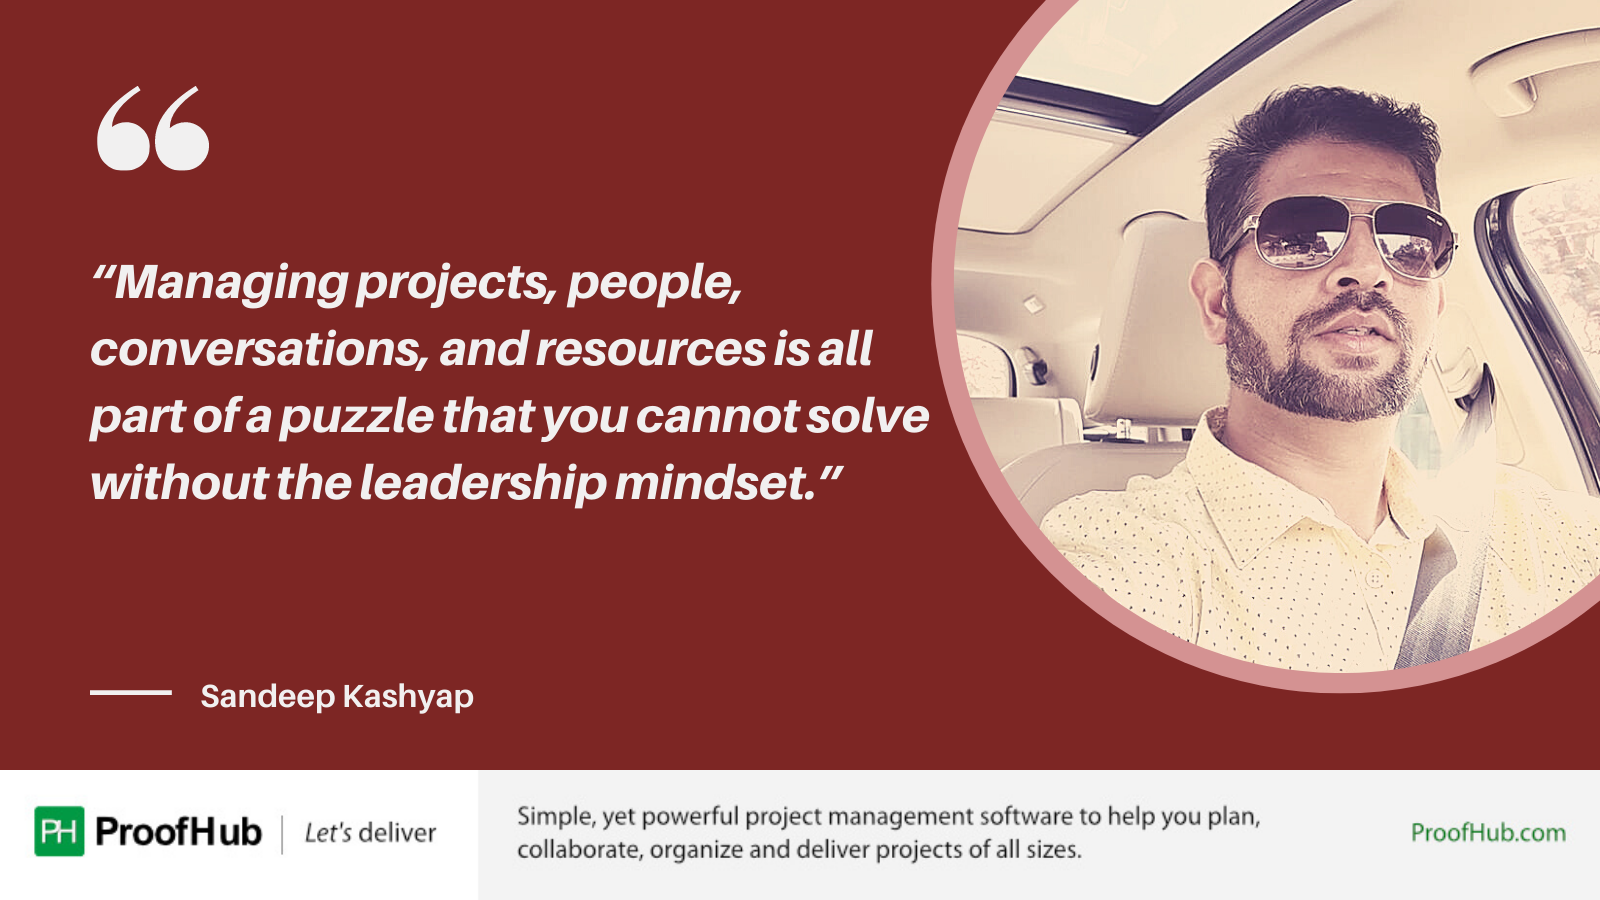 Managing projects, people, conversations, and resources is all part of a puzzle that you cannot solve without the leadership mindset Quote by Sandeep Kashyap